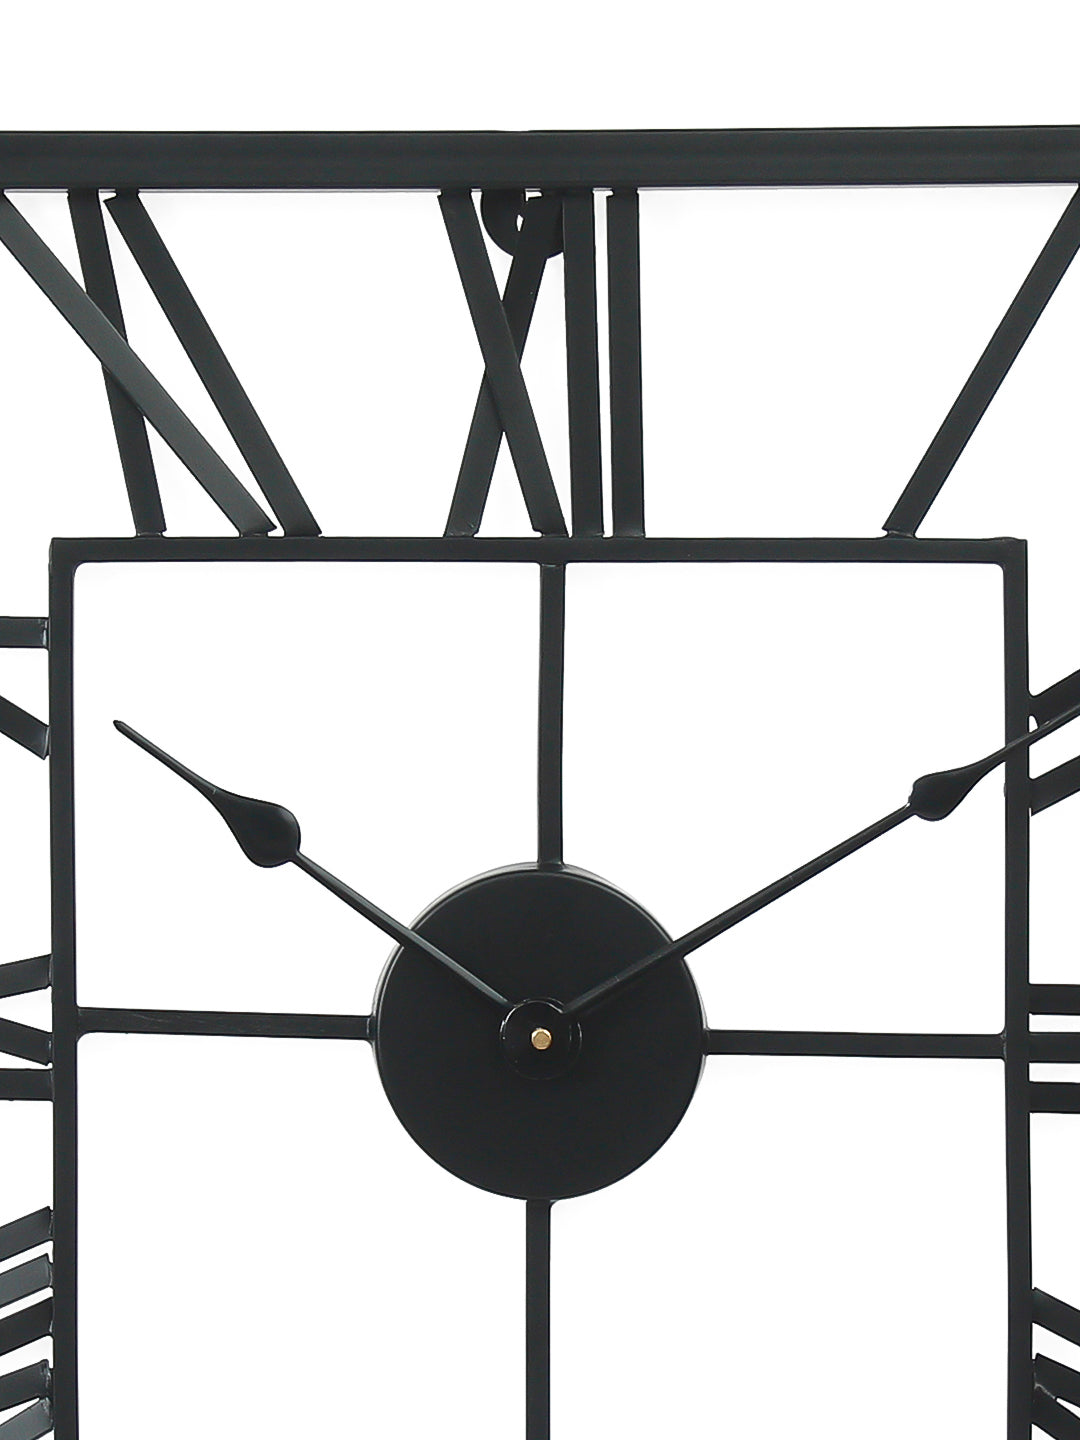 Black Iron Square Handcrafted Analog Roman Numeral Wall Clock Without Glass 4